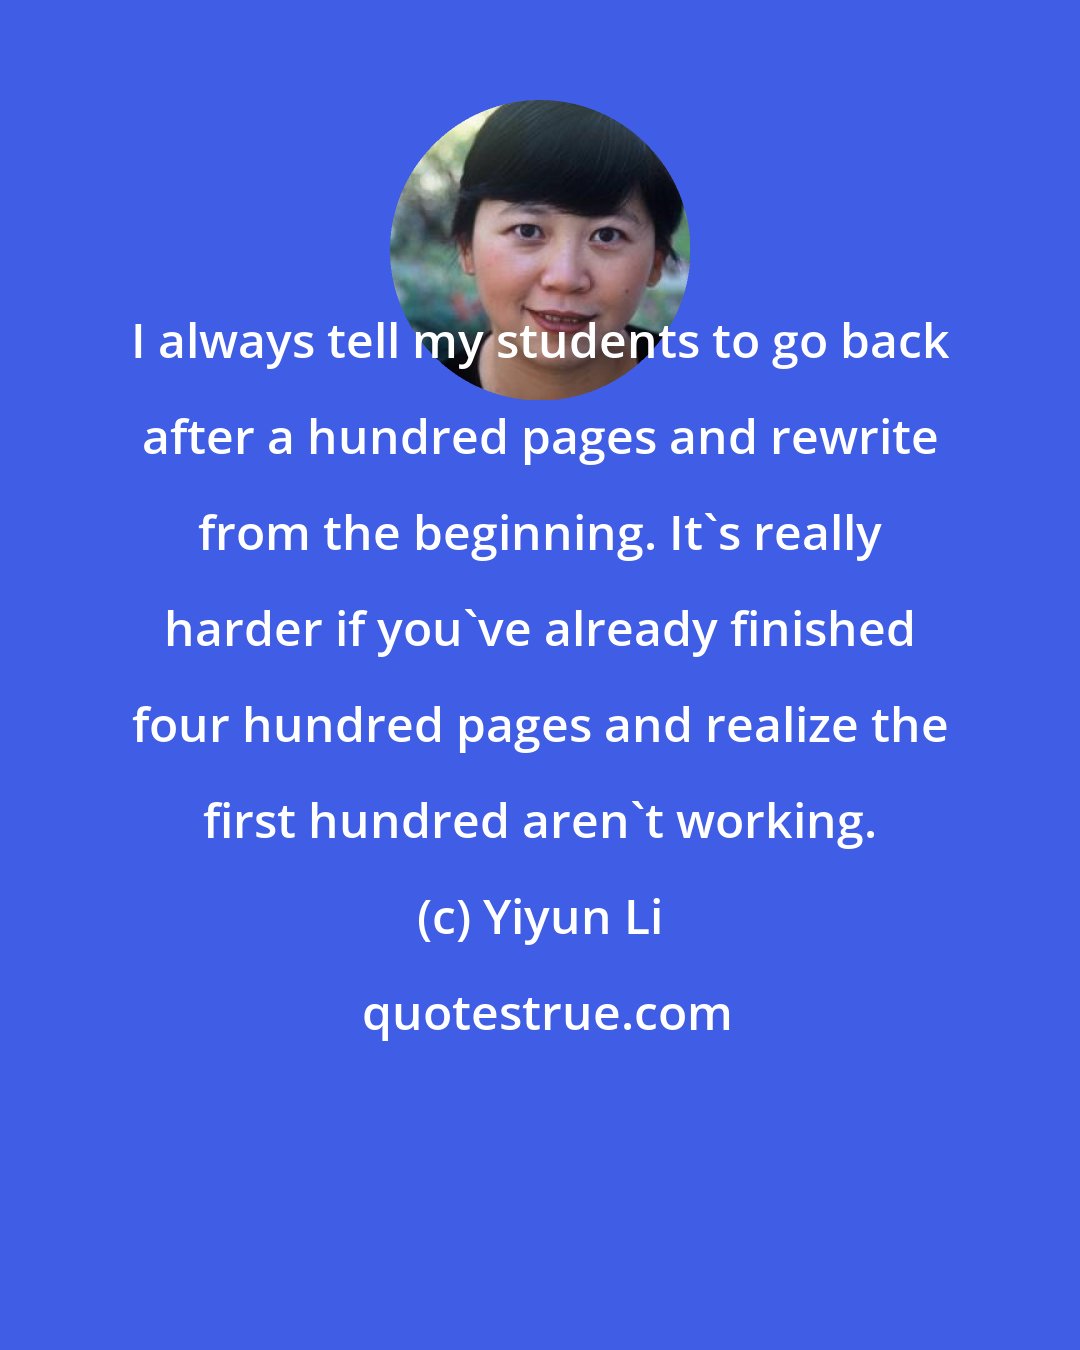 Yiyun Li: I always tell my students to go back after a hundred pages and rewrite from the beginning. It's really harder if you've already finished four hundred pages and realize the first hundred aren't working.